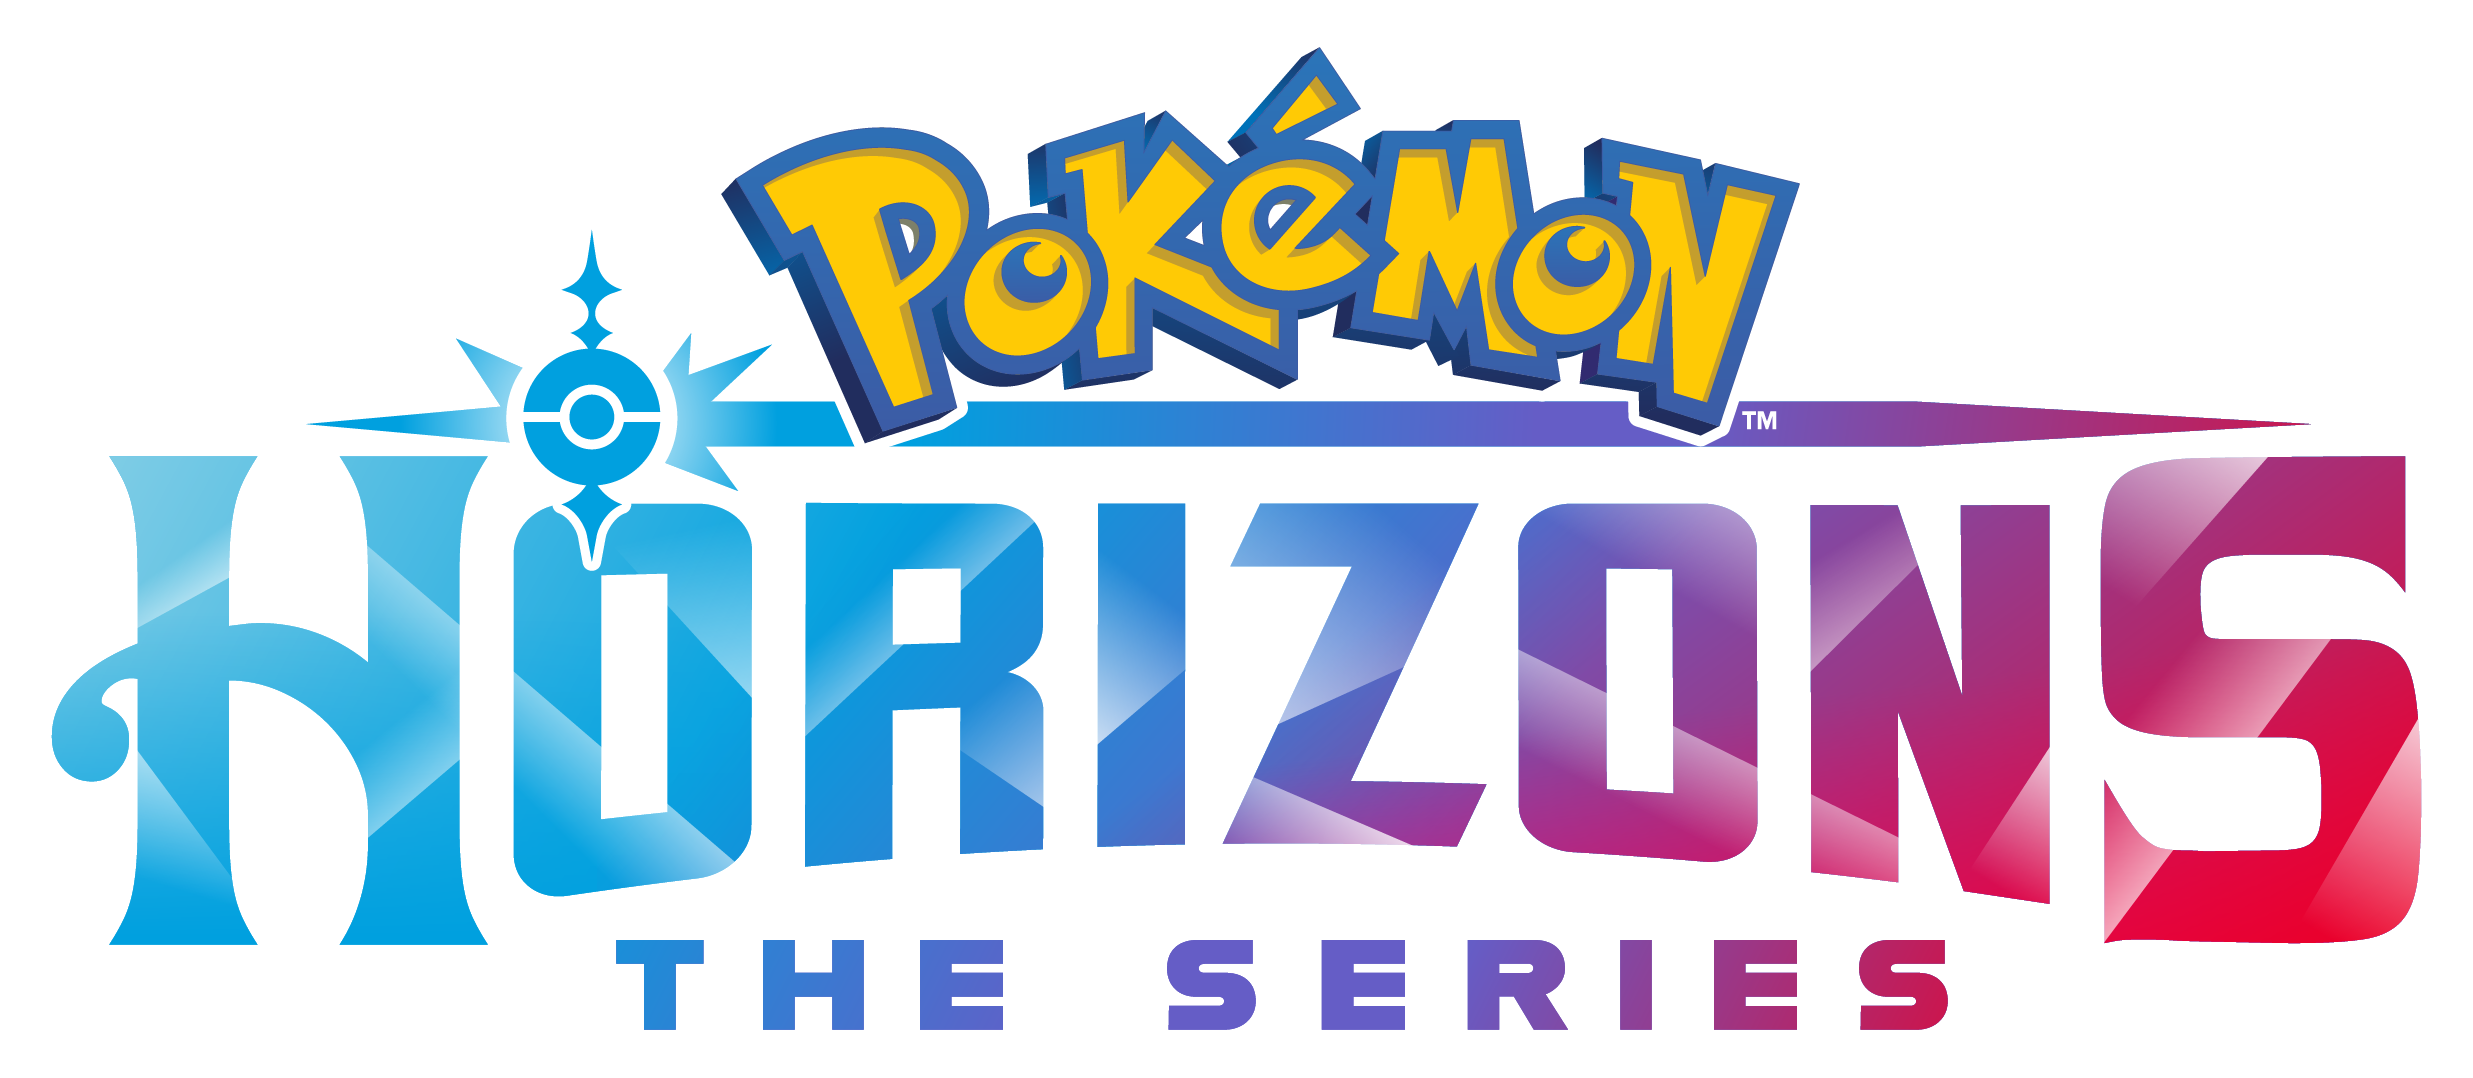 What's your overall opinions on Pokémon Horizons after the first